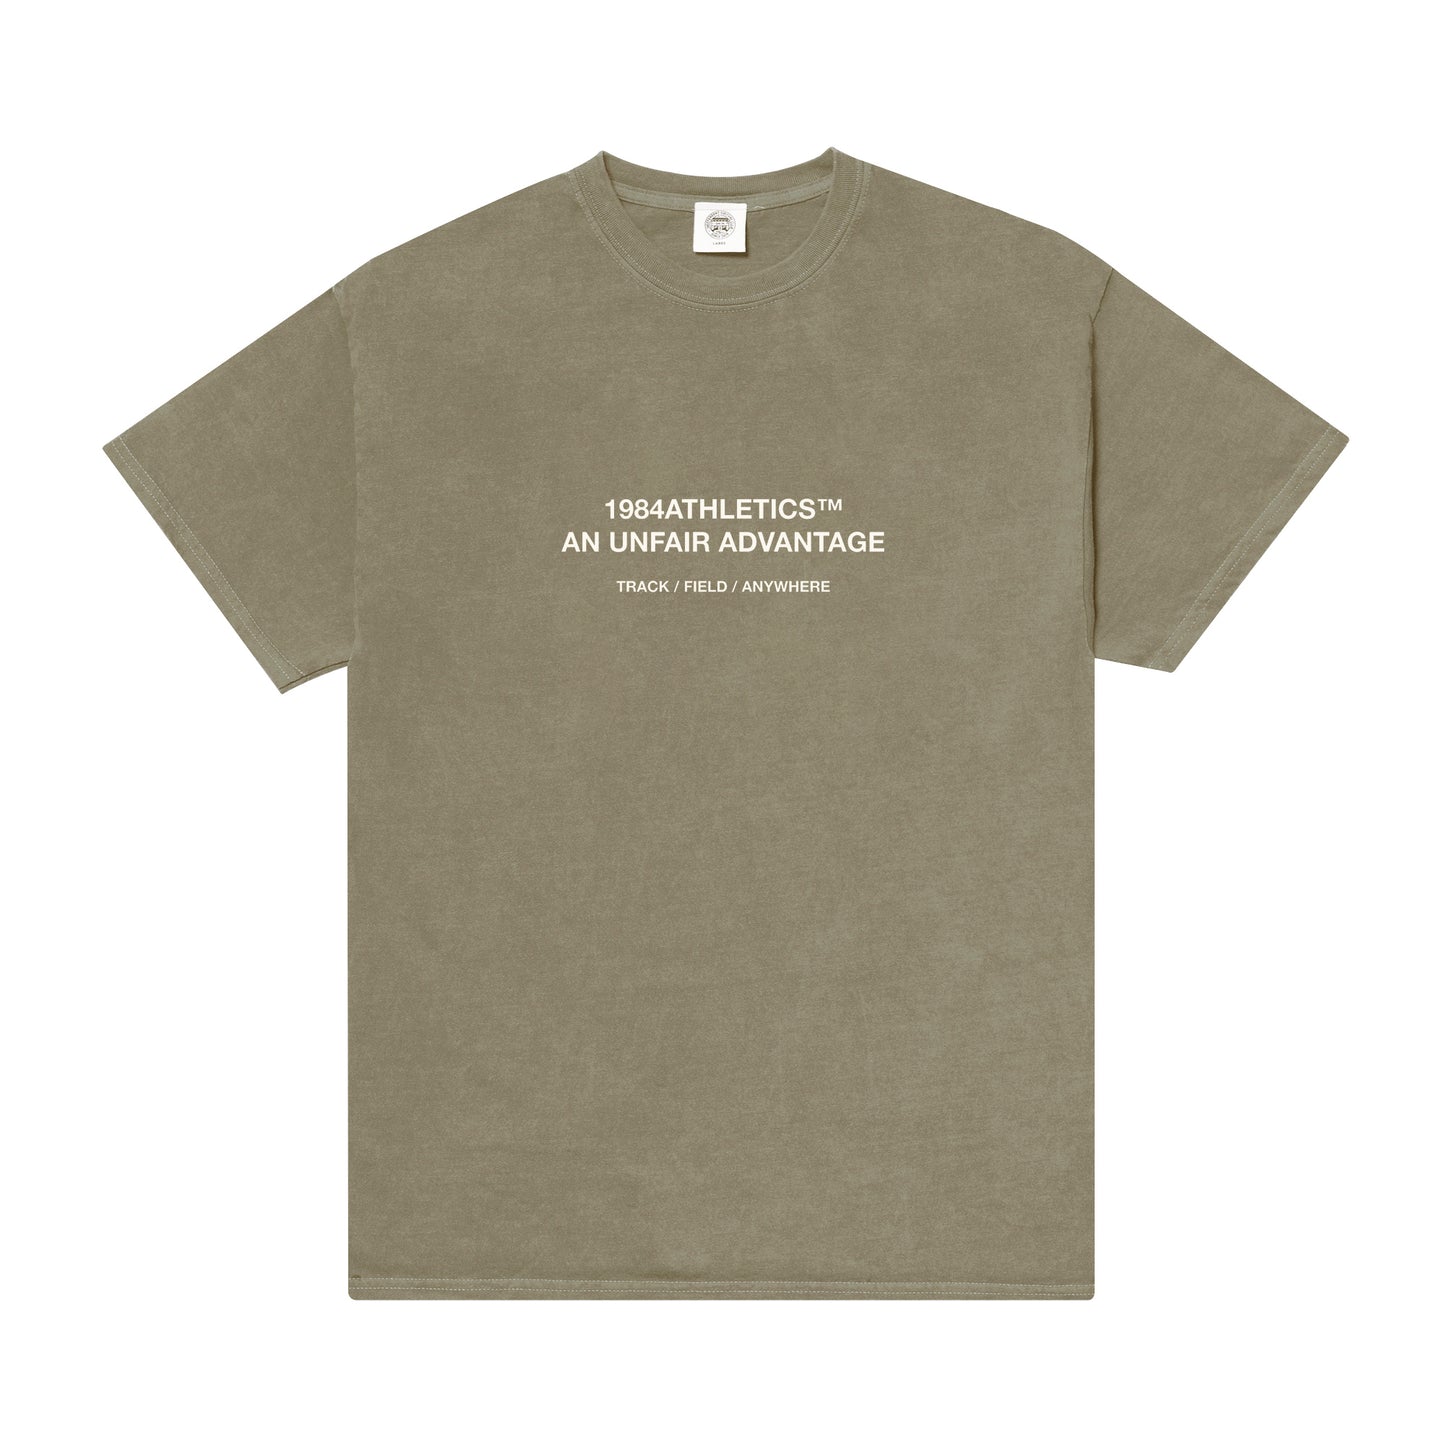 Vice 84 'Athletics' Vintage Washed Tee - Army Green – UN:IK Clothing